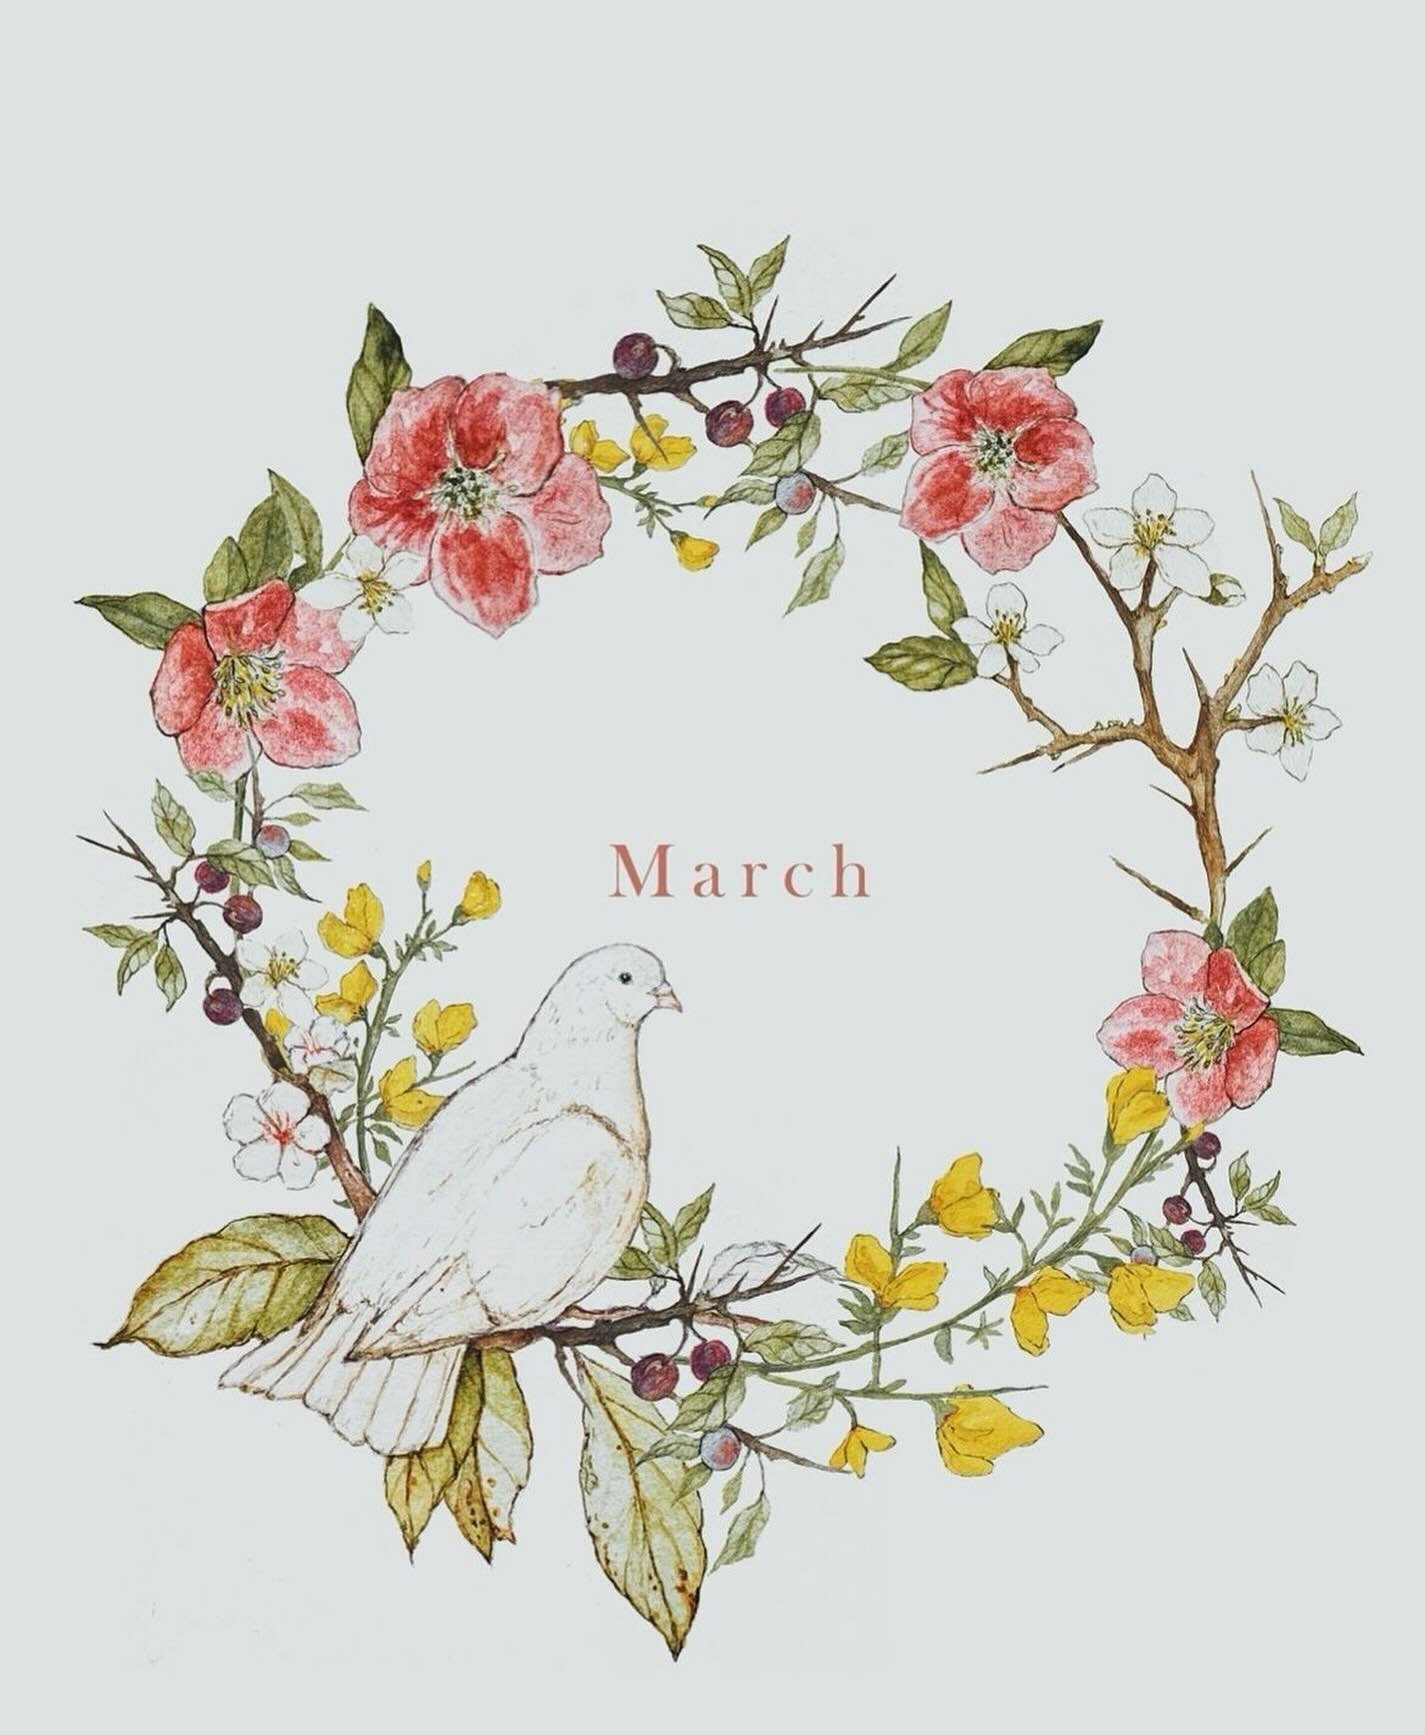 Welcome March 🦋
Happy shift of the season ethos family. 
March brings the equinox, and the beginning of a new cycle. Spring is all about sowing seeds, new beginnings, and cleansing our bodies from the stagnancy of winter. This is shown to us by the 